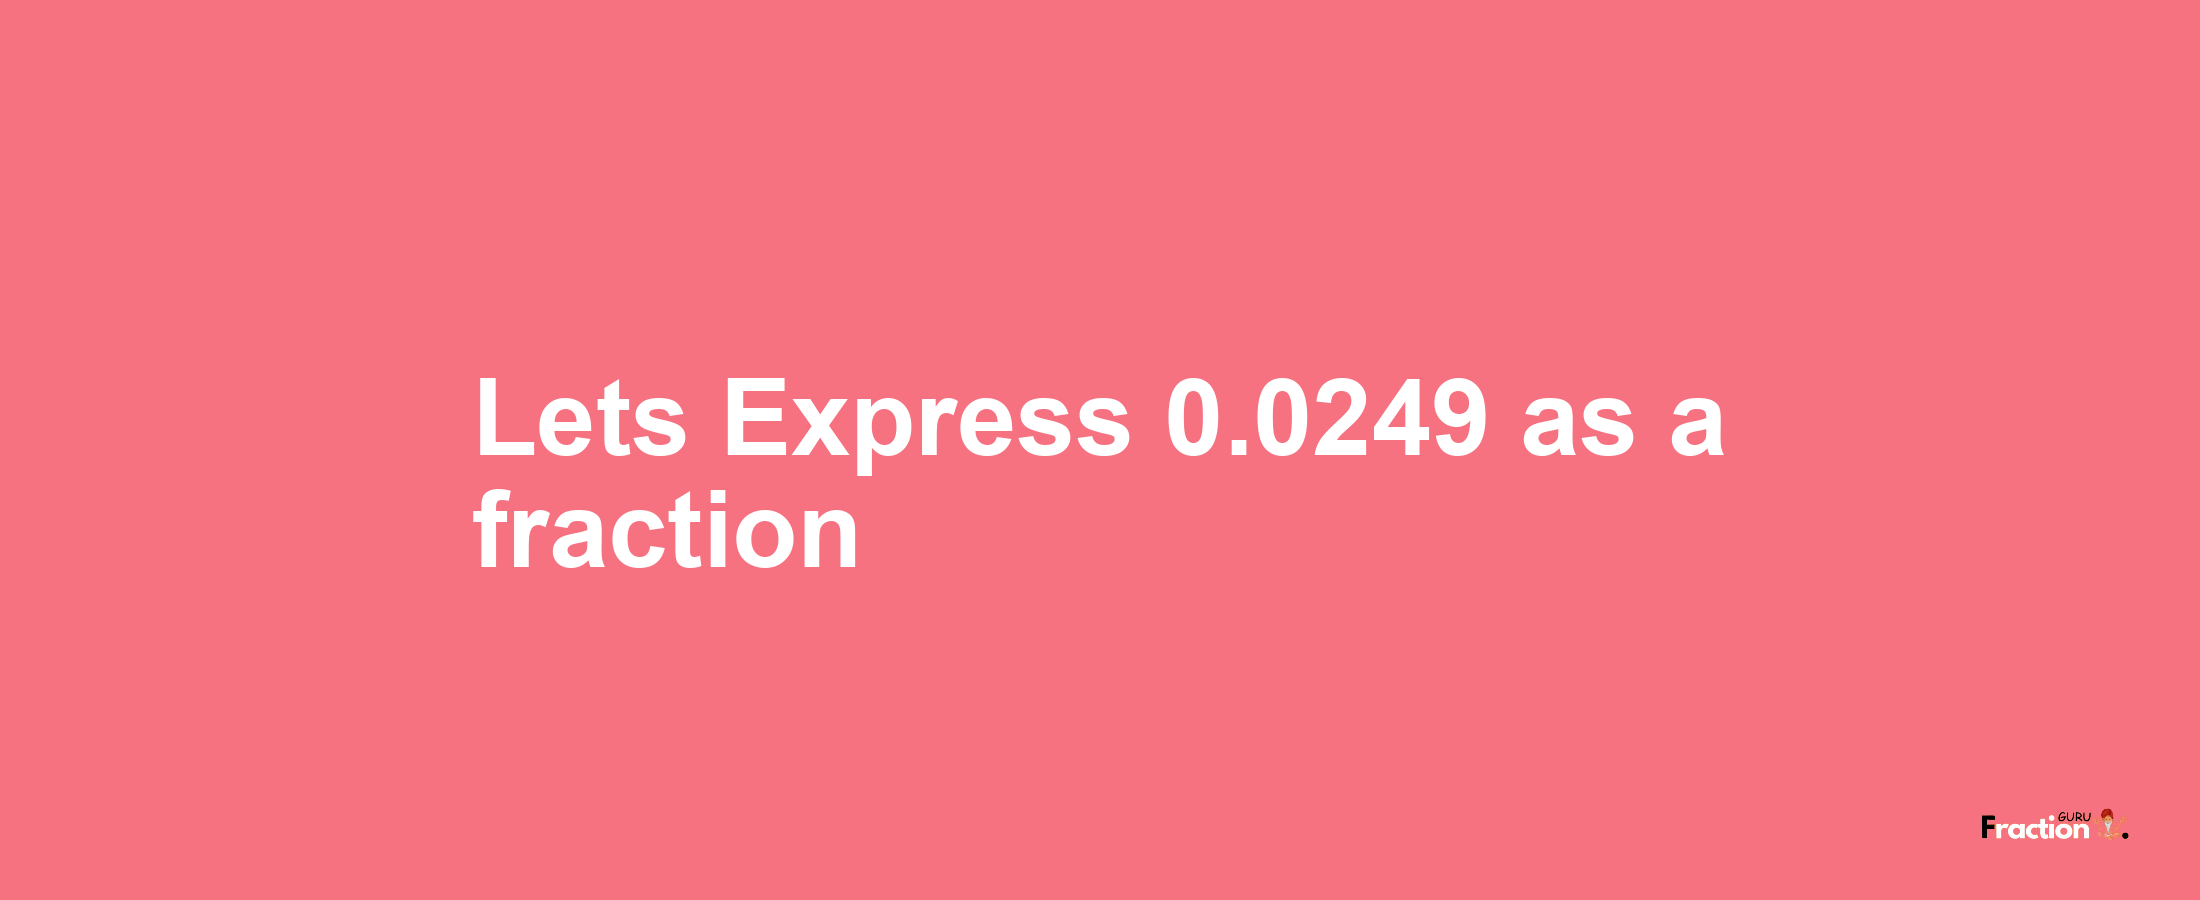 Lets Express 0.0249 as afraction